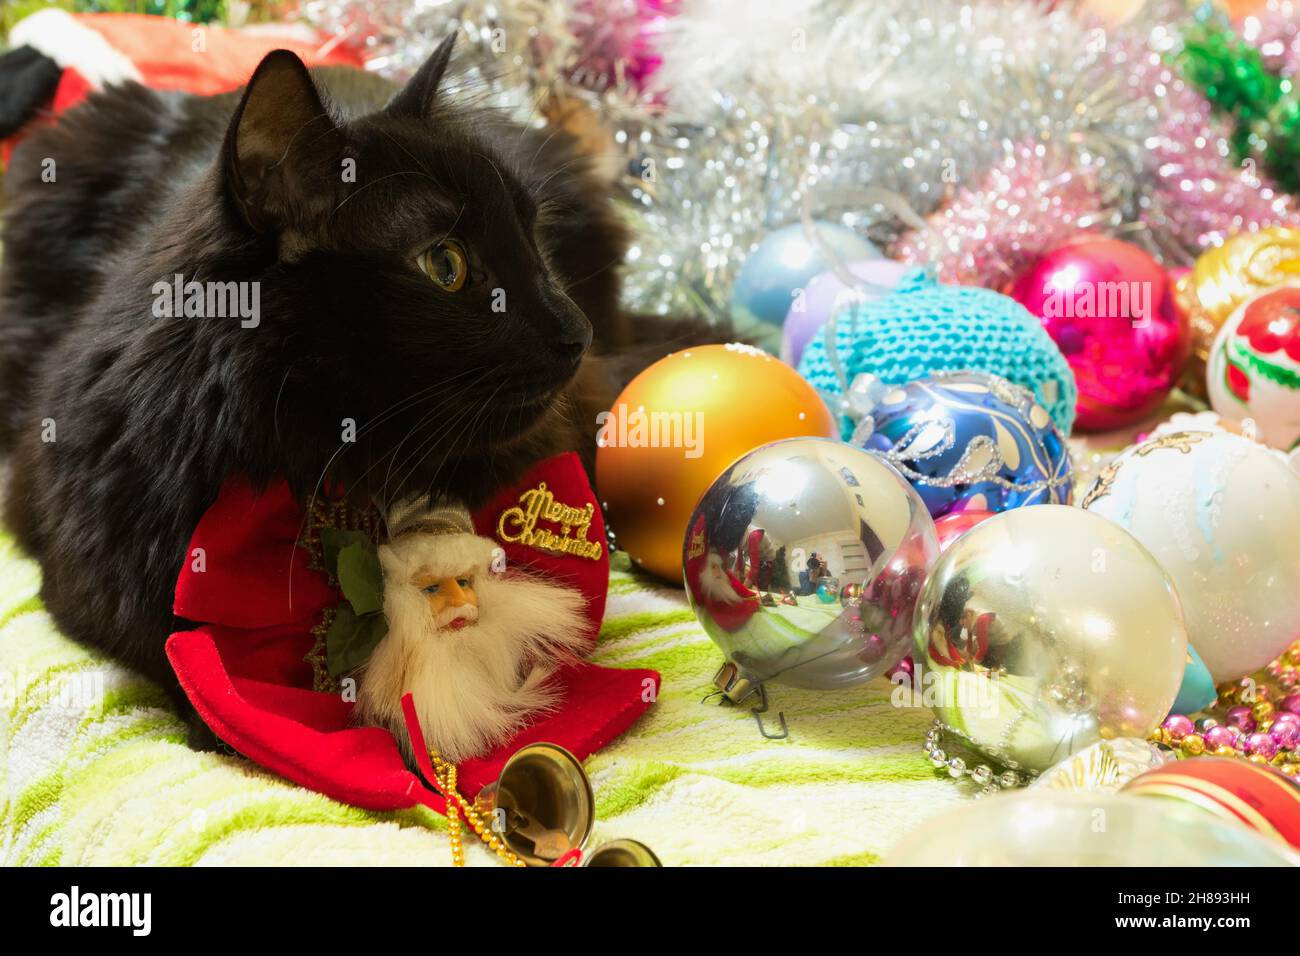 Christmas portrait of a cat in festive decorations. Stock Photo